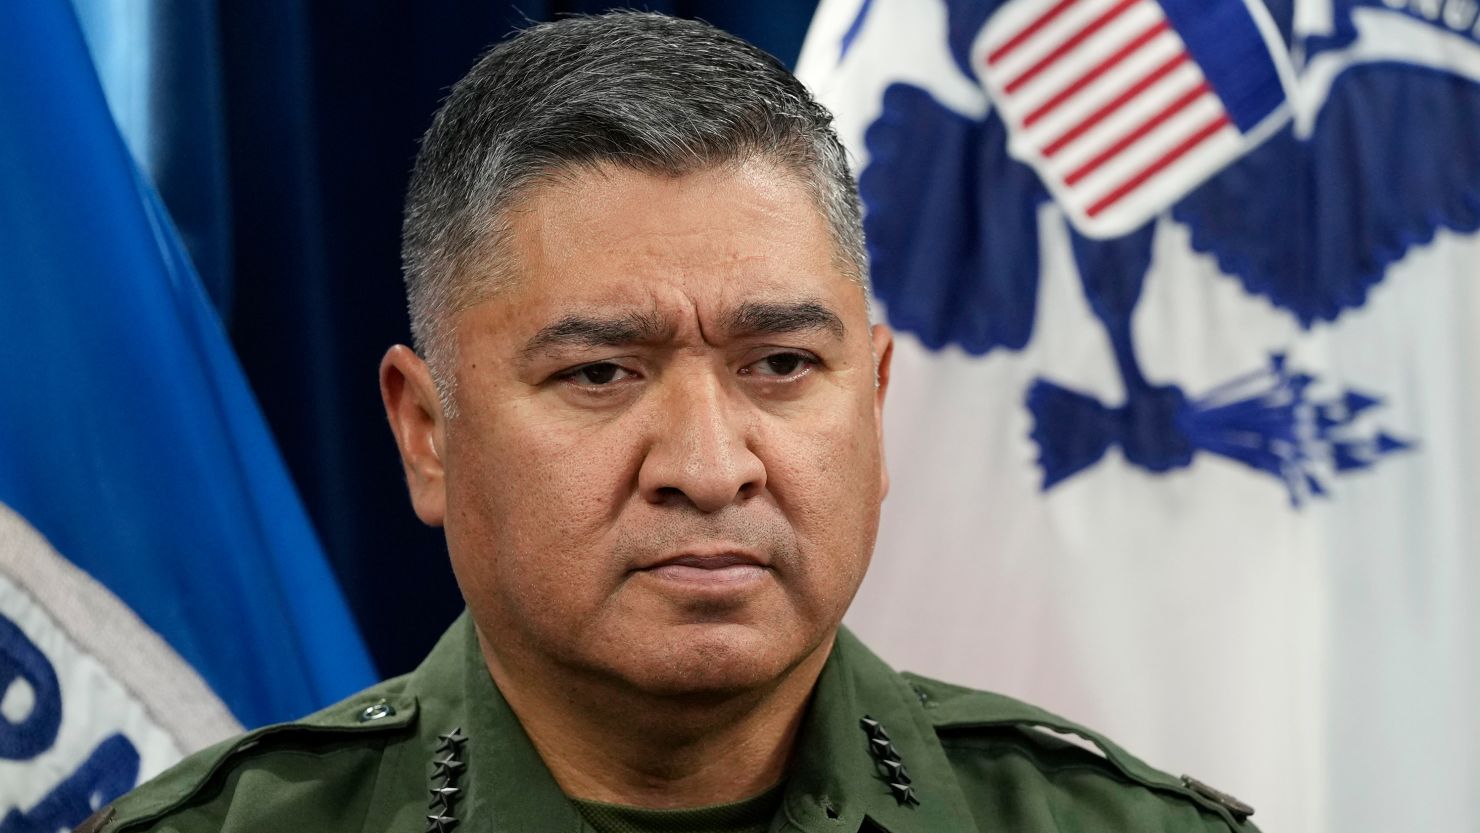 U.S. Border Patrol Chief Raul Ortiz listens during a news conference, Jan. 5, 2023, in Washington. The head of the U.S. Border Patrol announced on May 30, 2023, that he will be retiring at the end of June. 